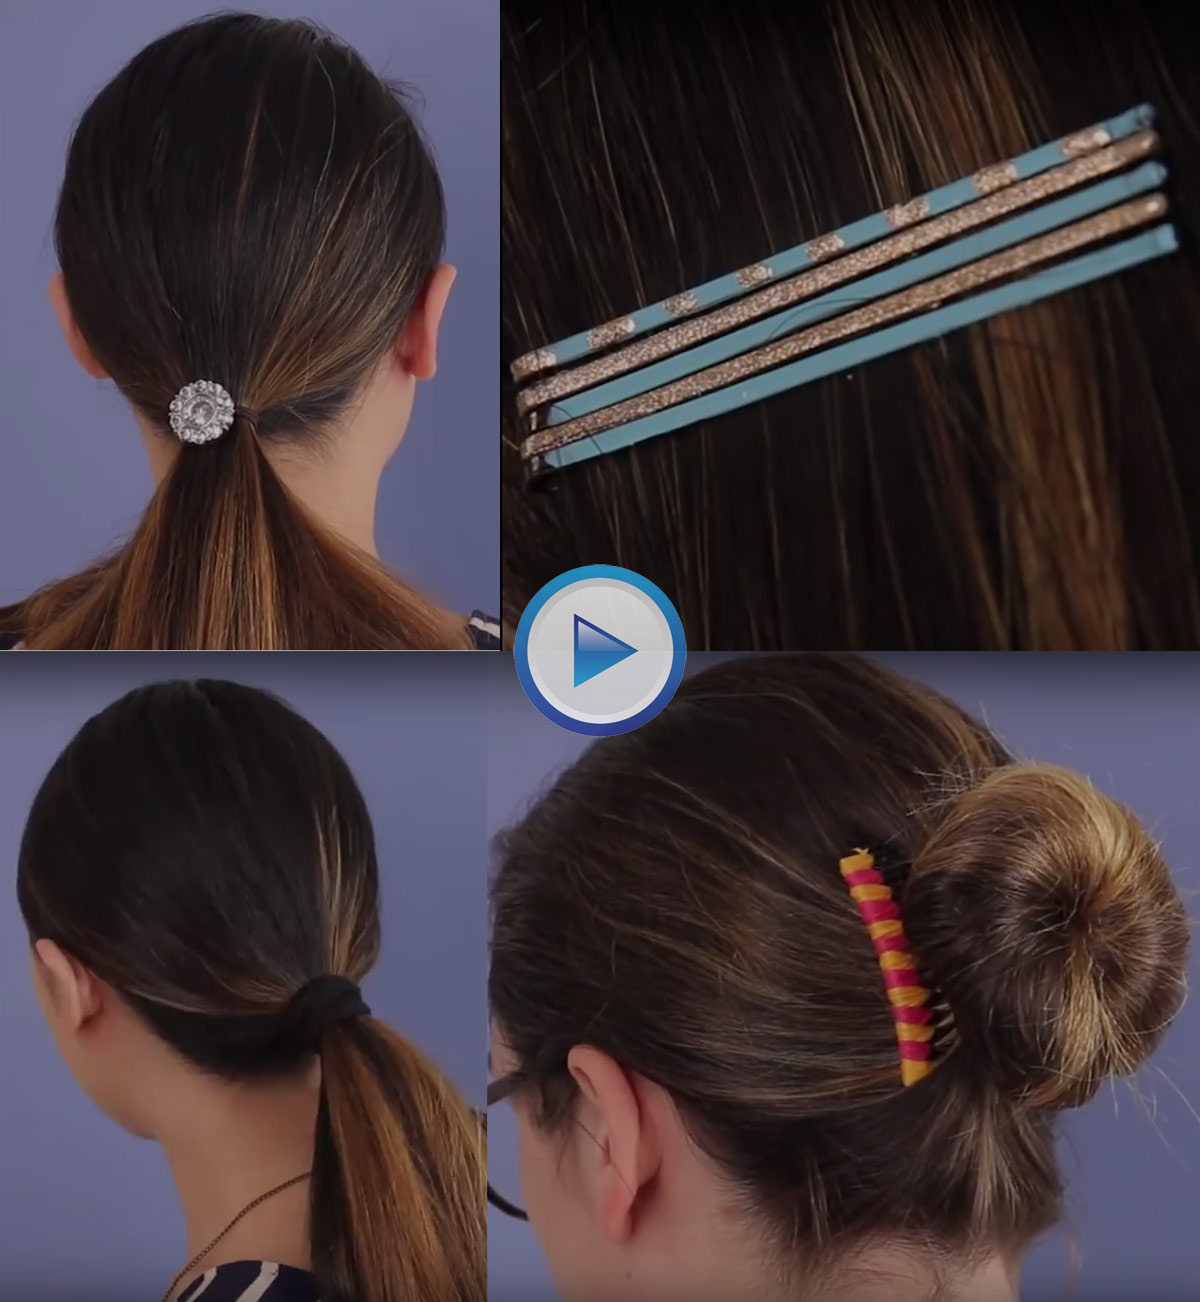 4 Easy Ways to Create Stylish Hair Clips At Home